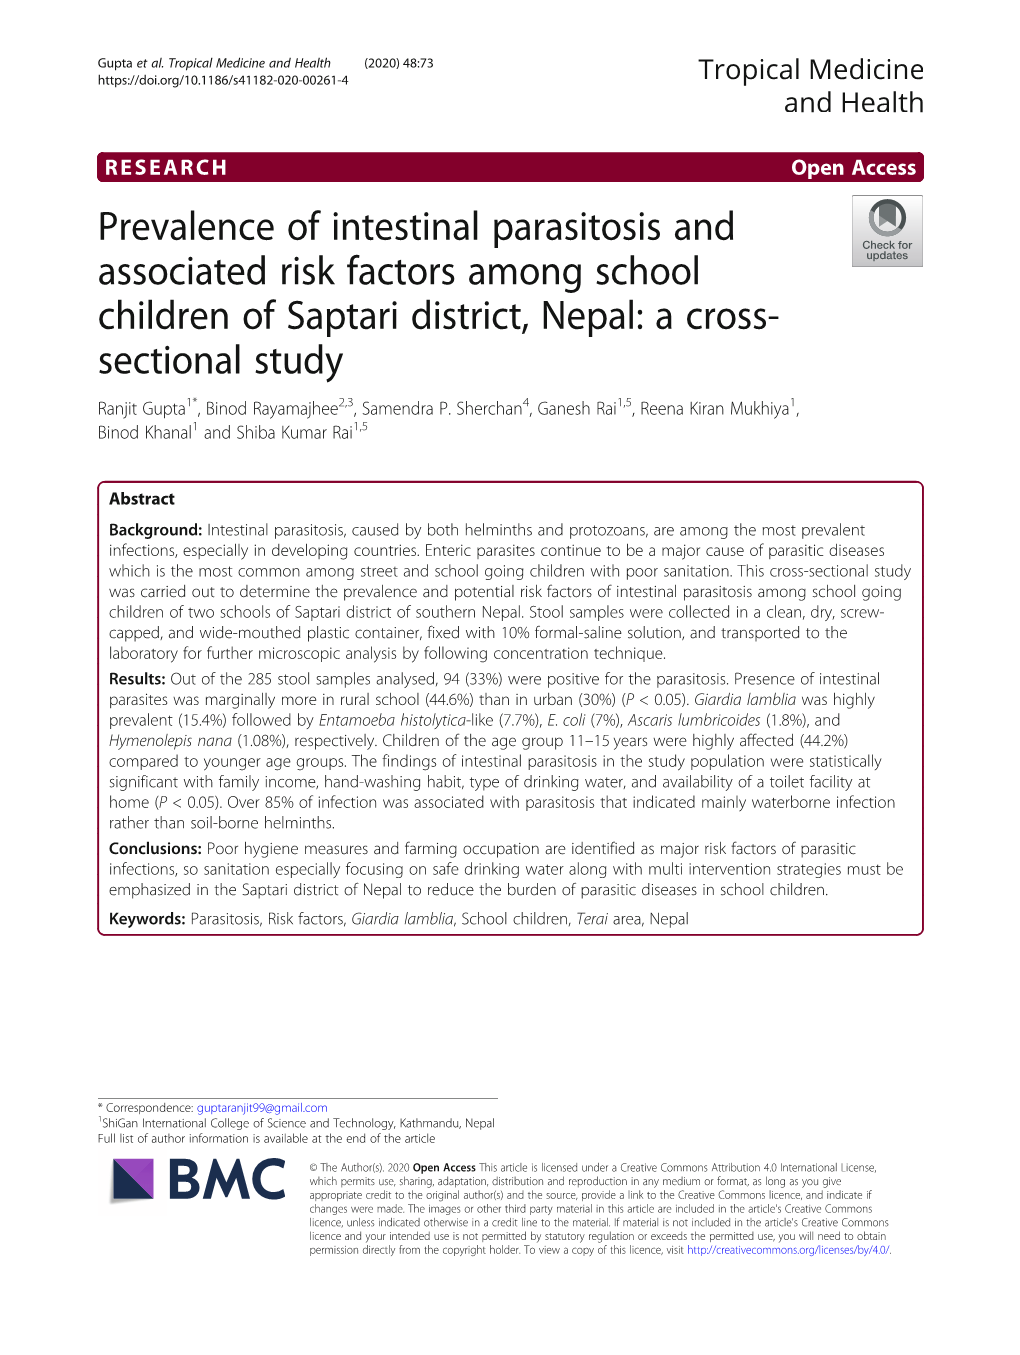 Prevalence of Intestinal Parasitosis and Associated Risk Factors Among